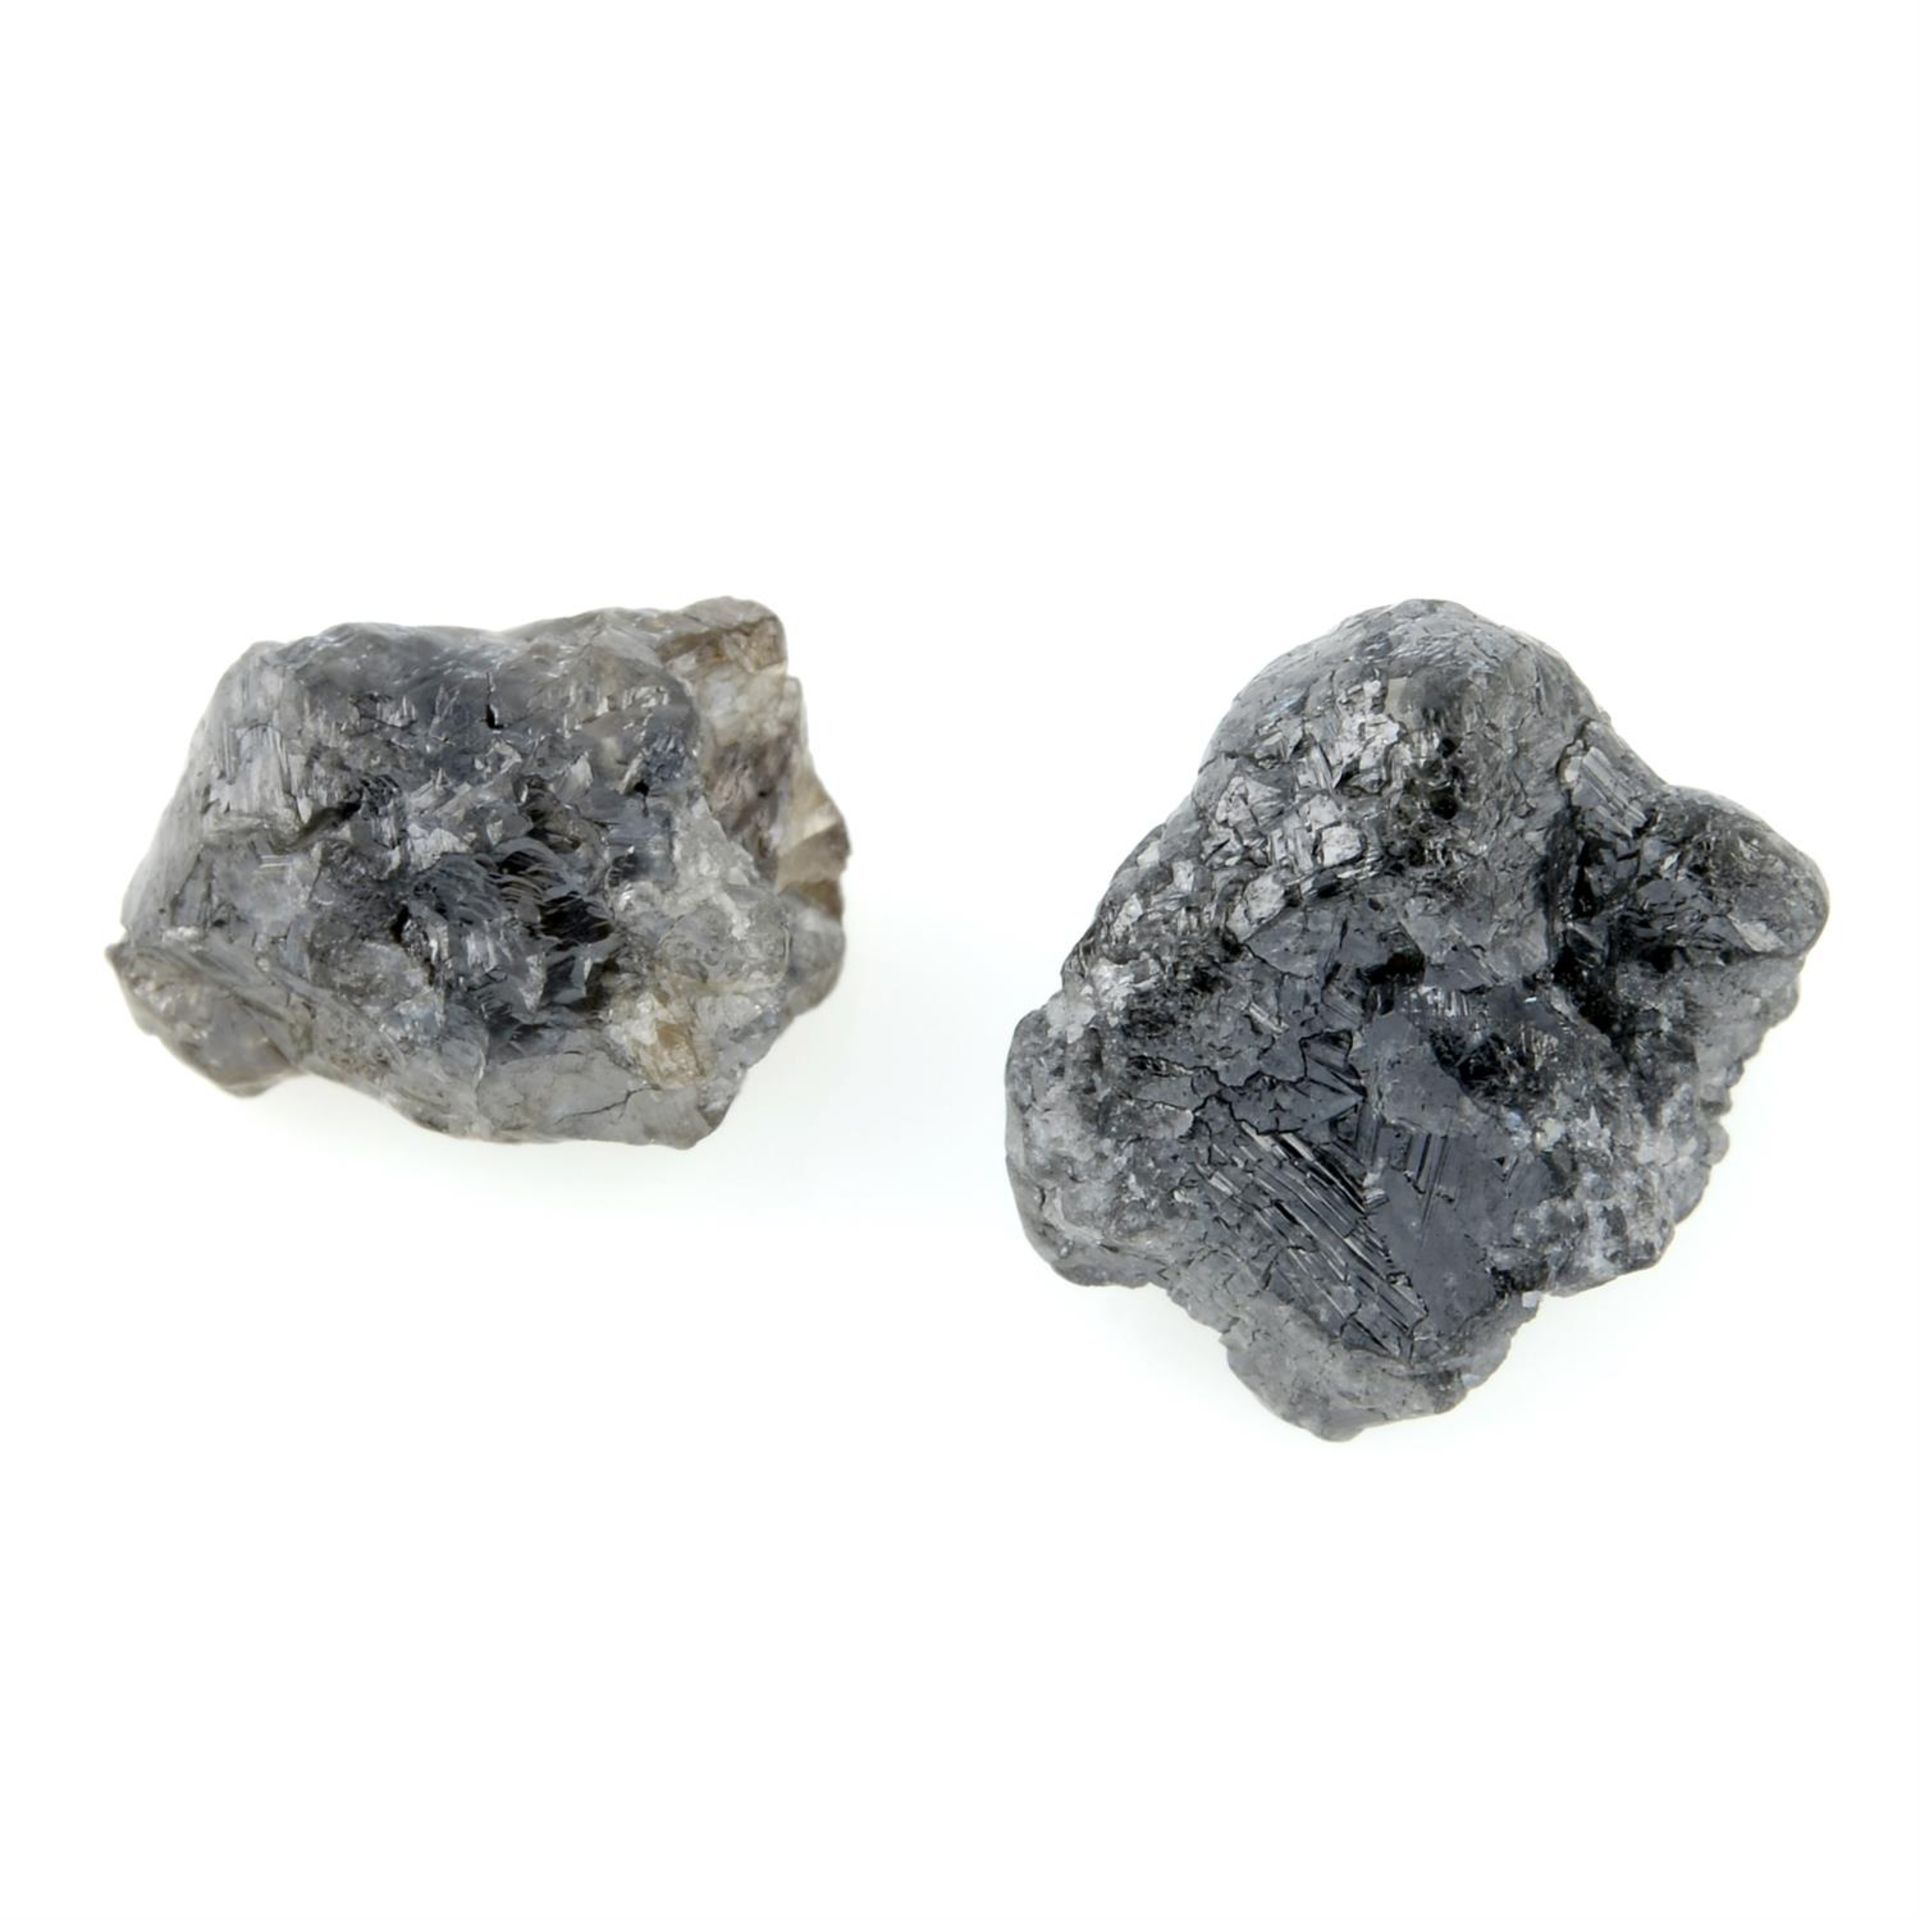 Two rough diamonds, weighing 7.51ct